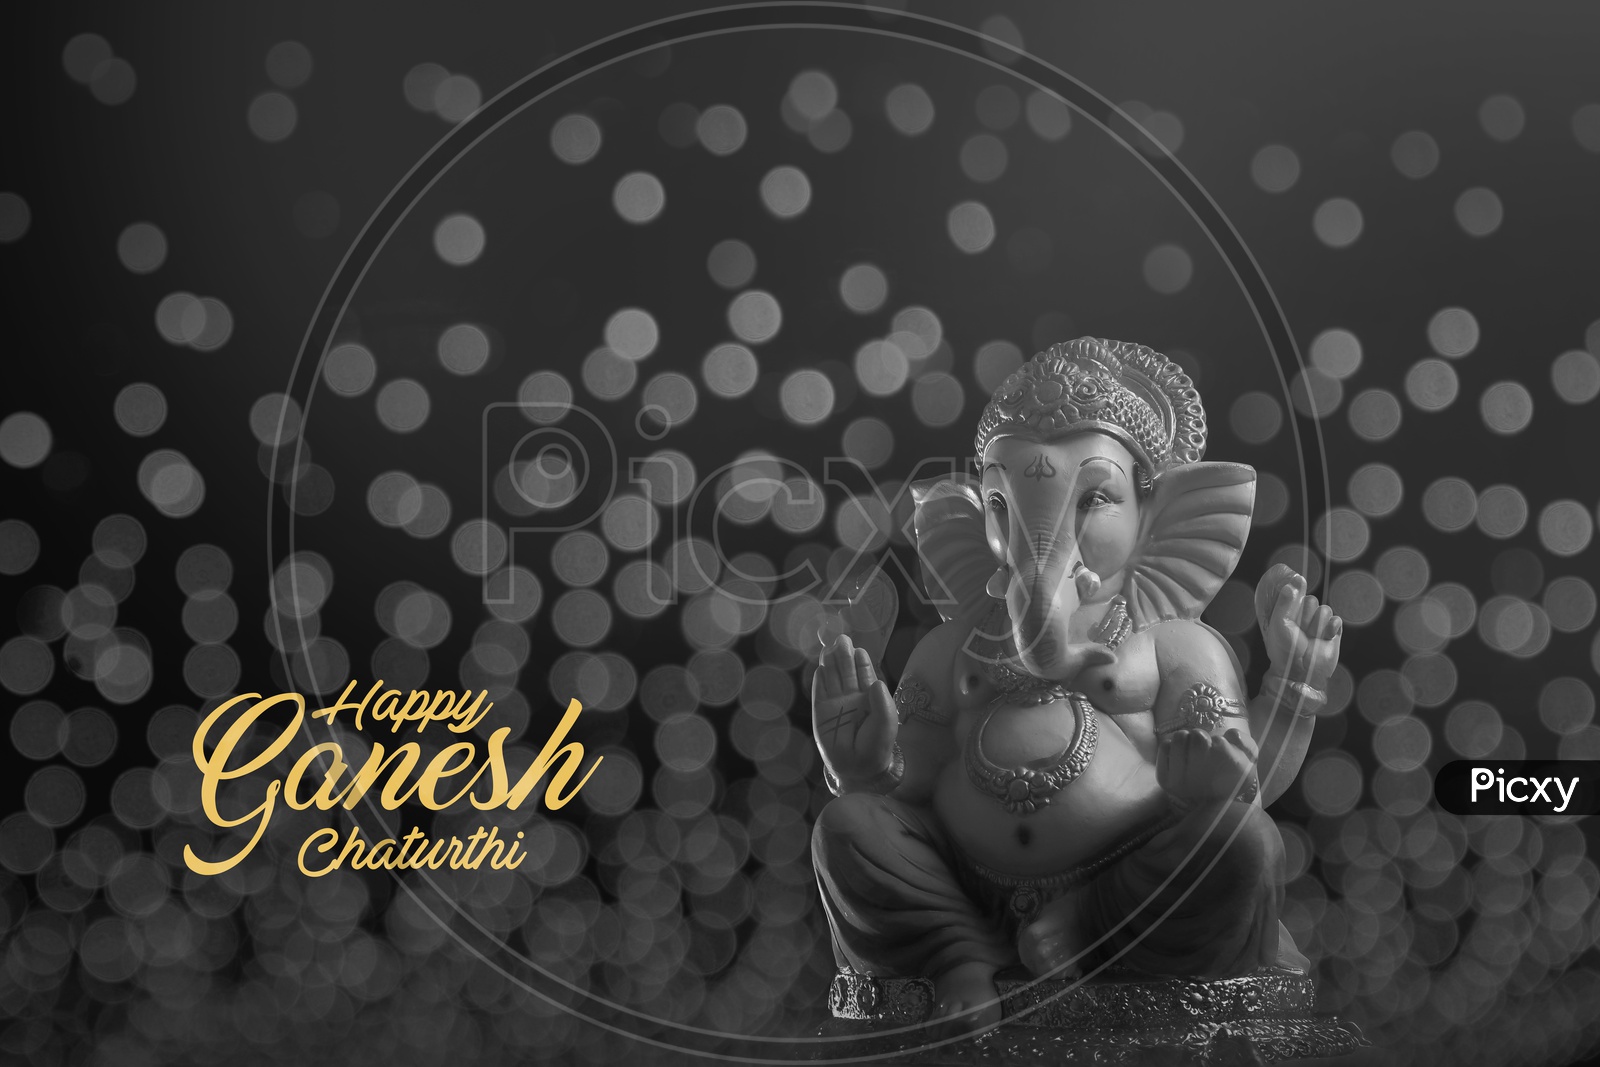 Happy Ganesh Chaturthi Poster with Ganesh Idol and beautiful Bokeh in the background